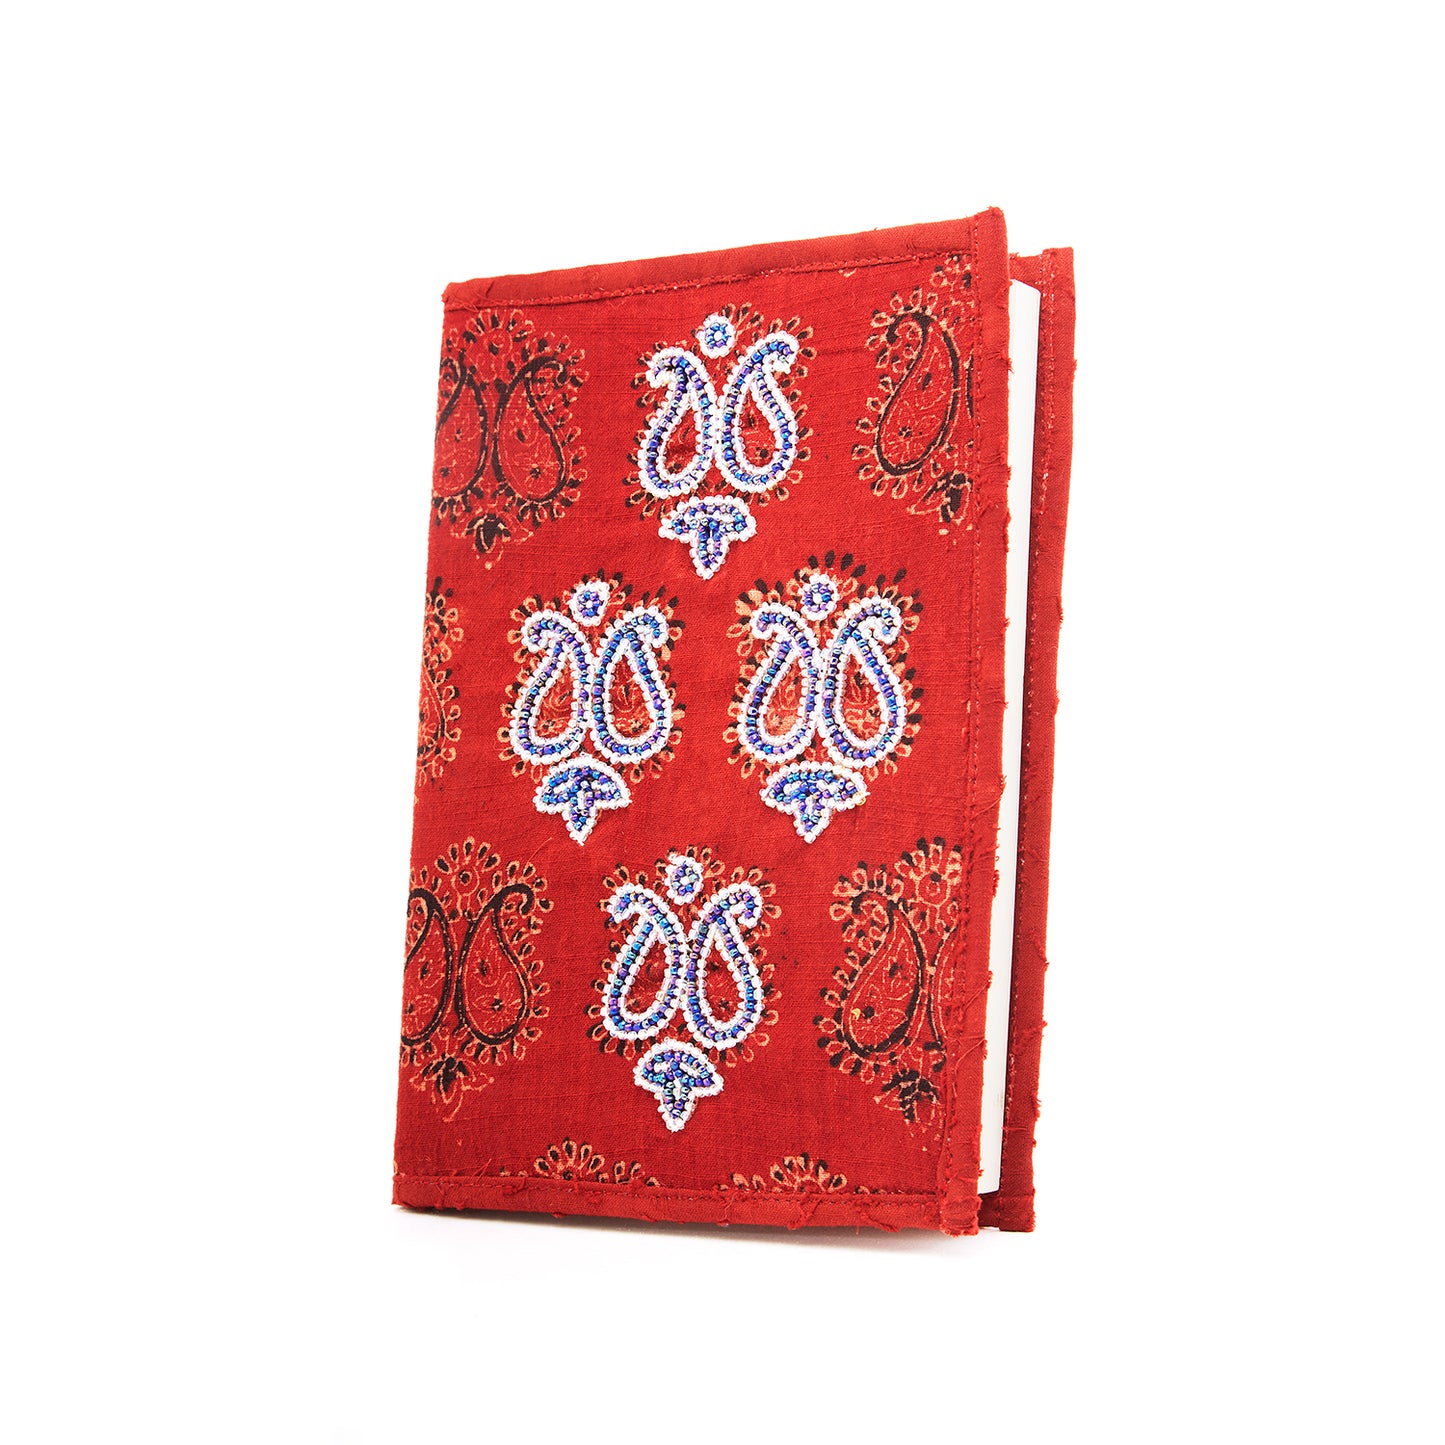 Candy Red Color - Diary with reusable cover made of Waste Fabric (with Ari Work)